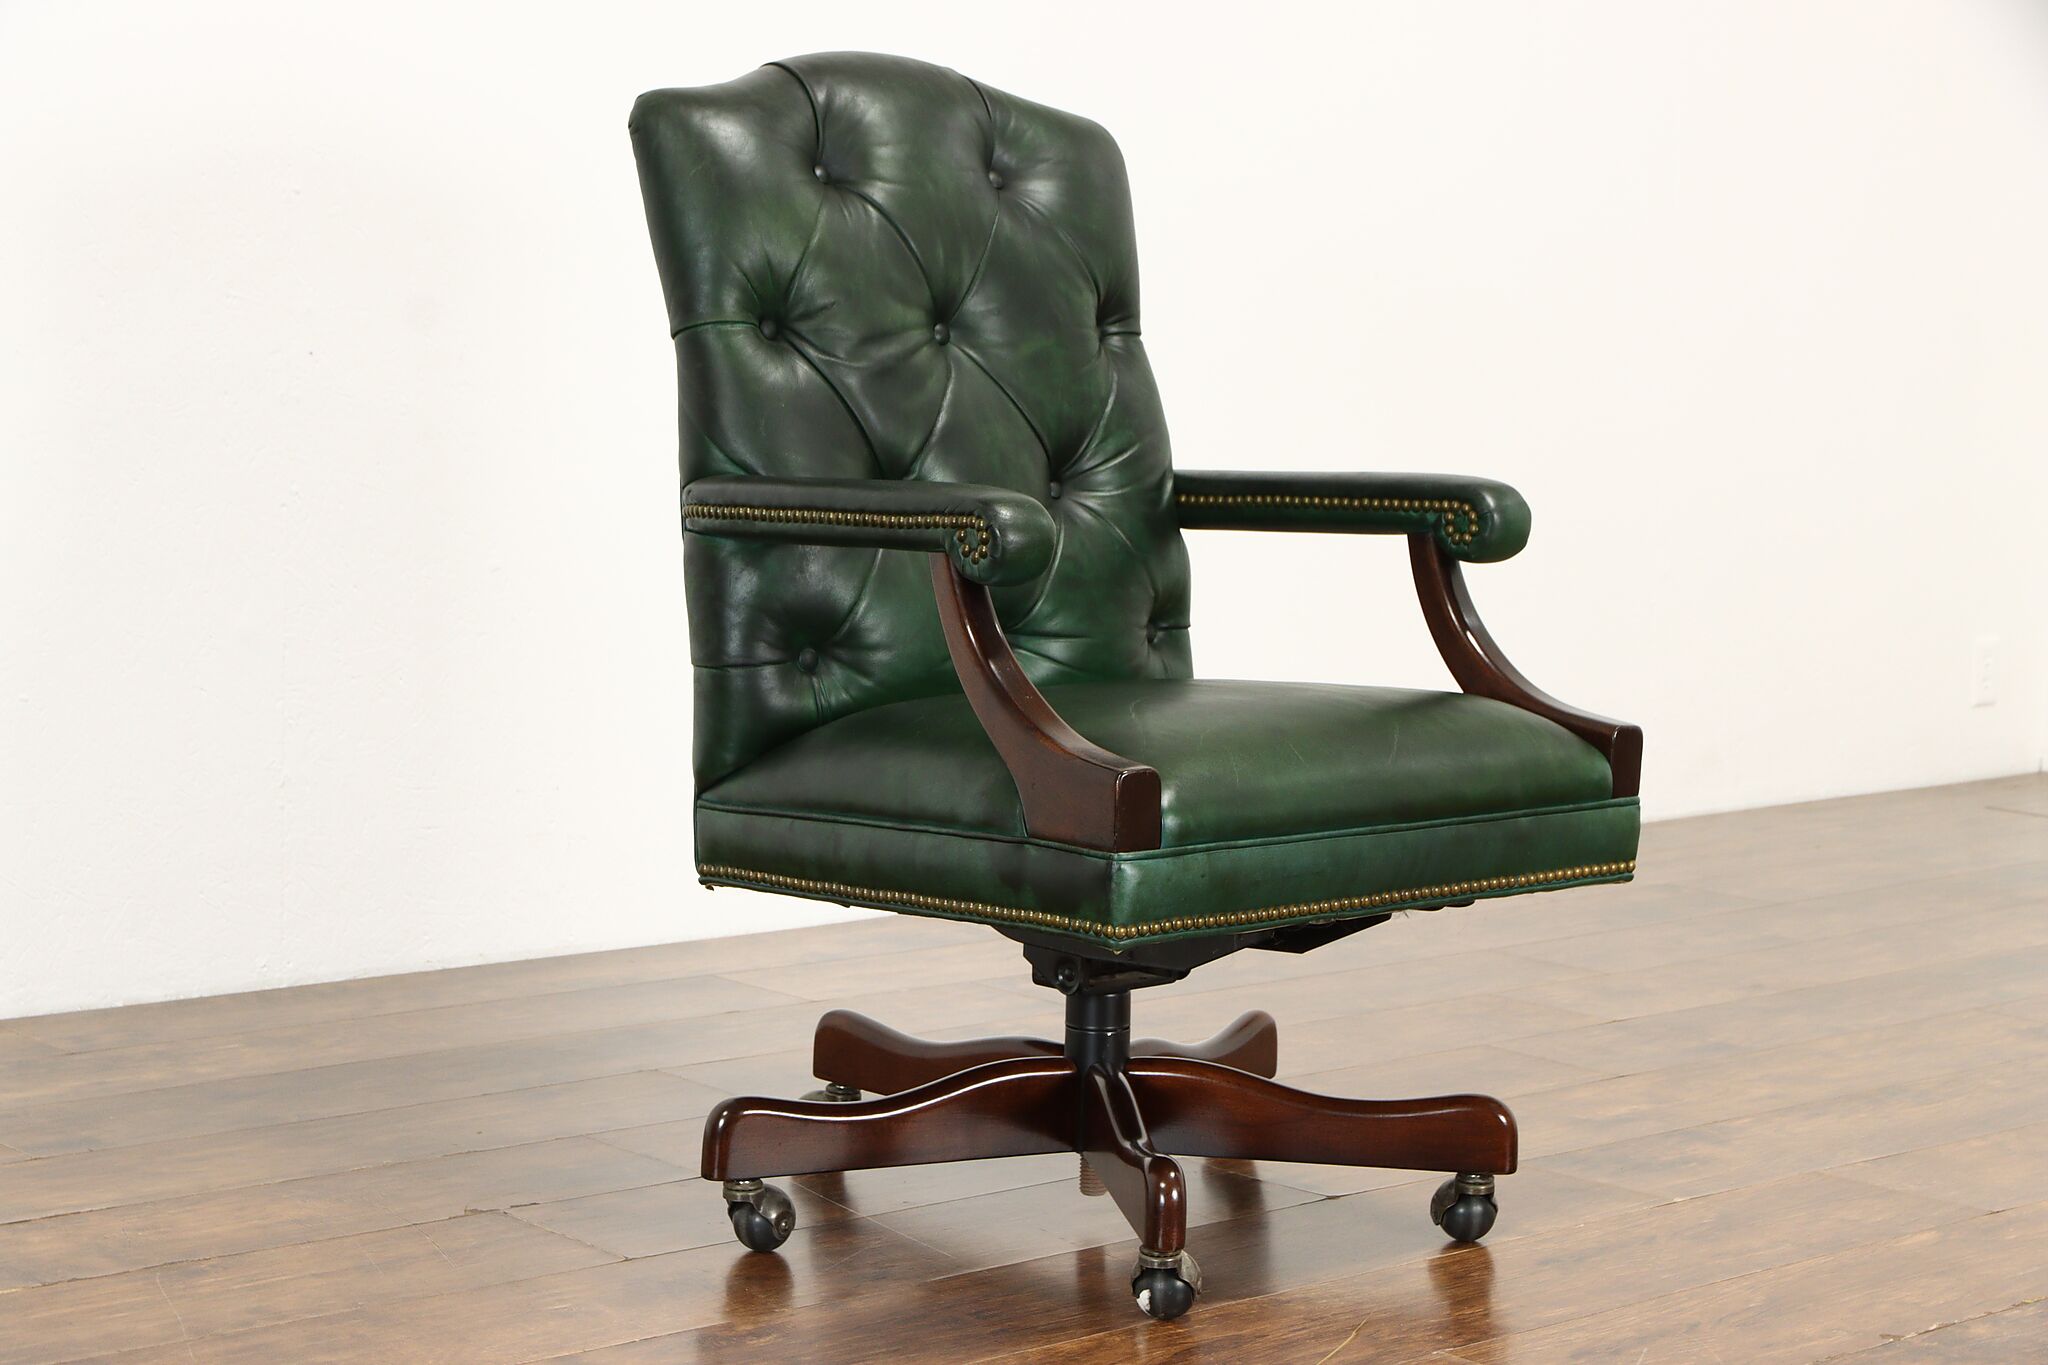 Green Leather Tufted Vintage Mahogany Swivel Adjustable Office Desk Chair